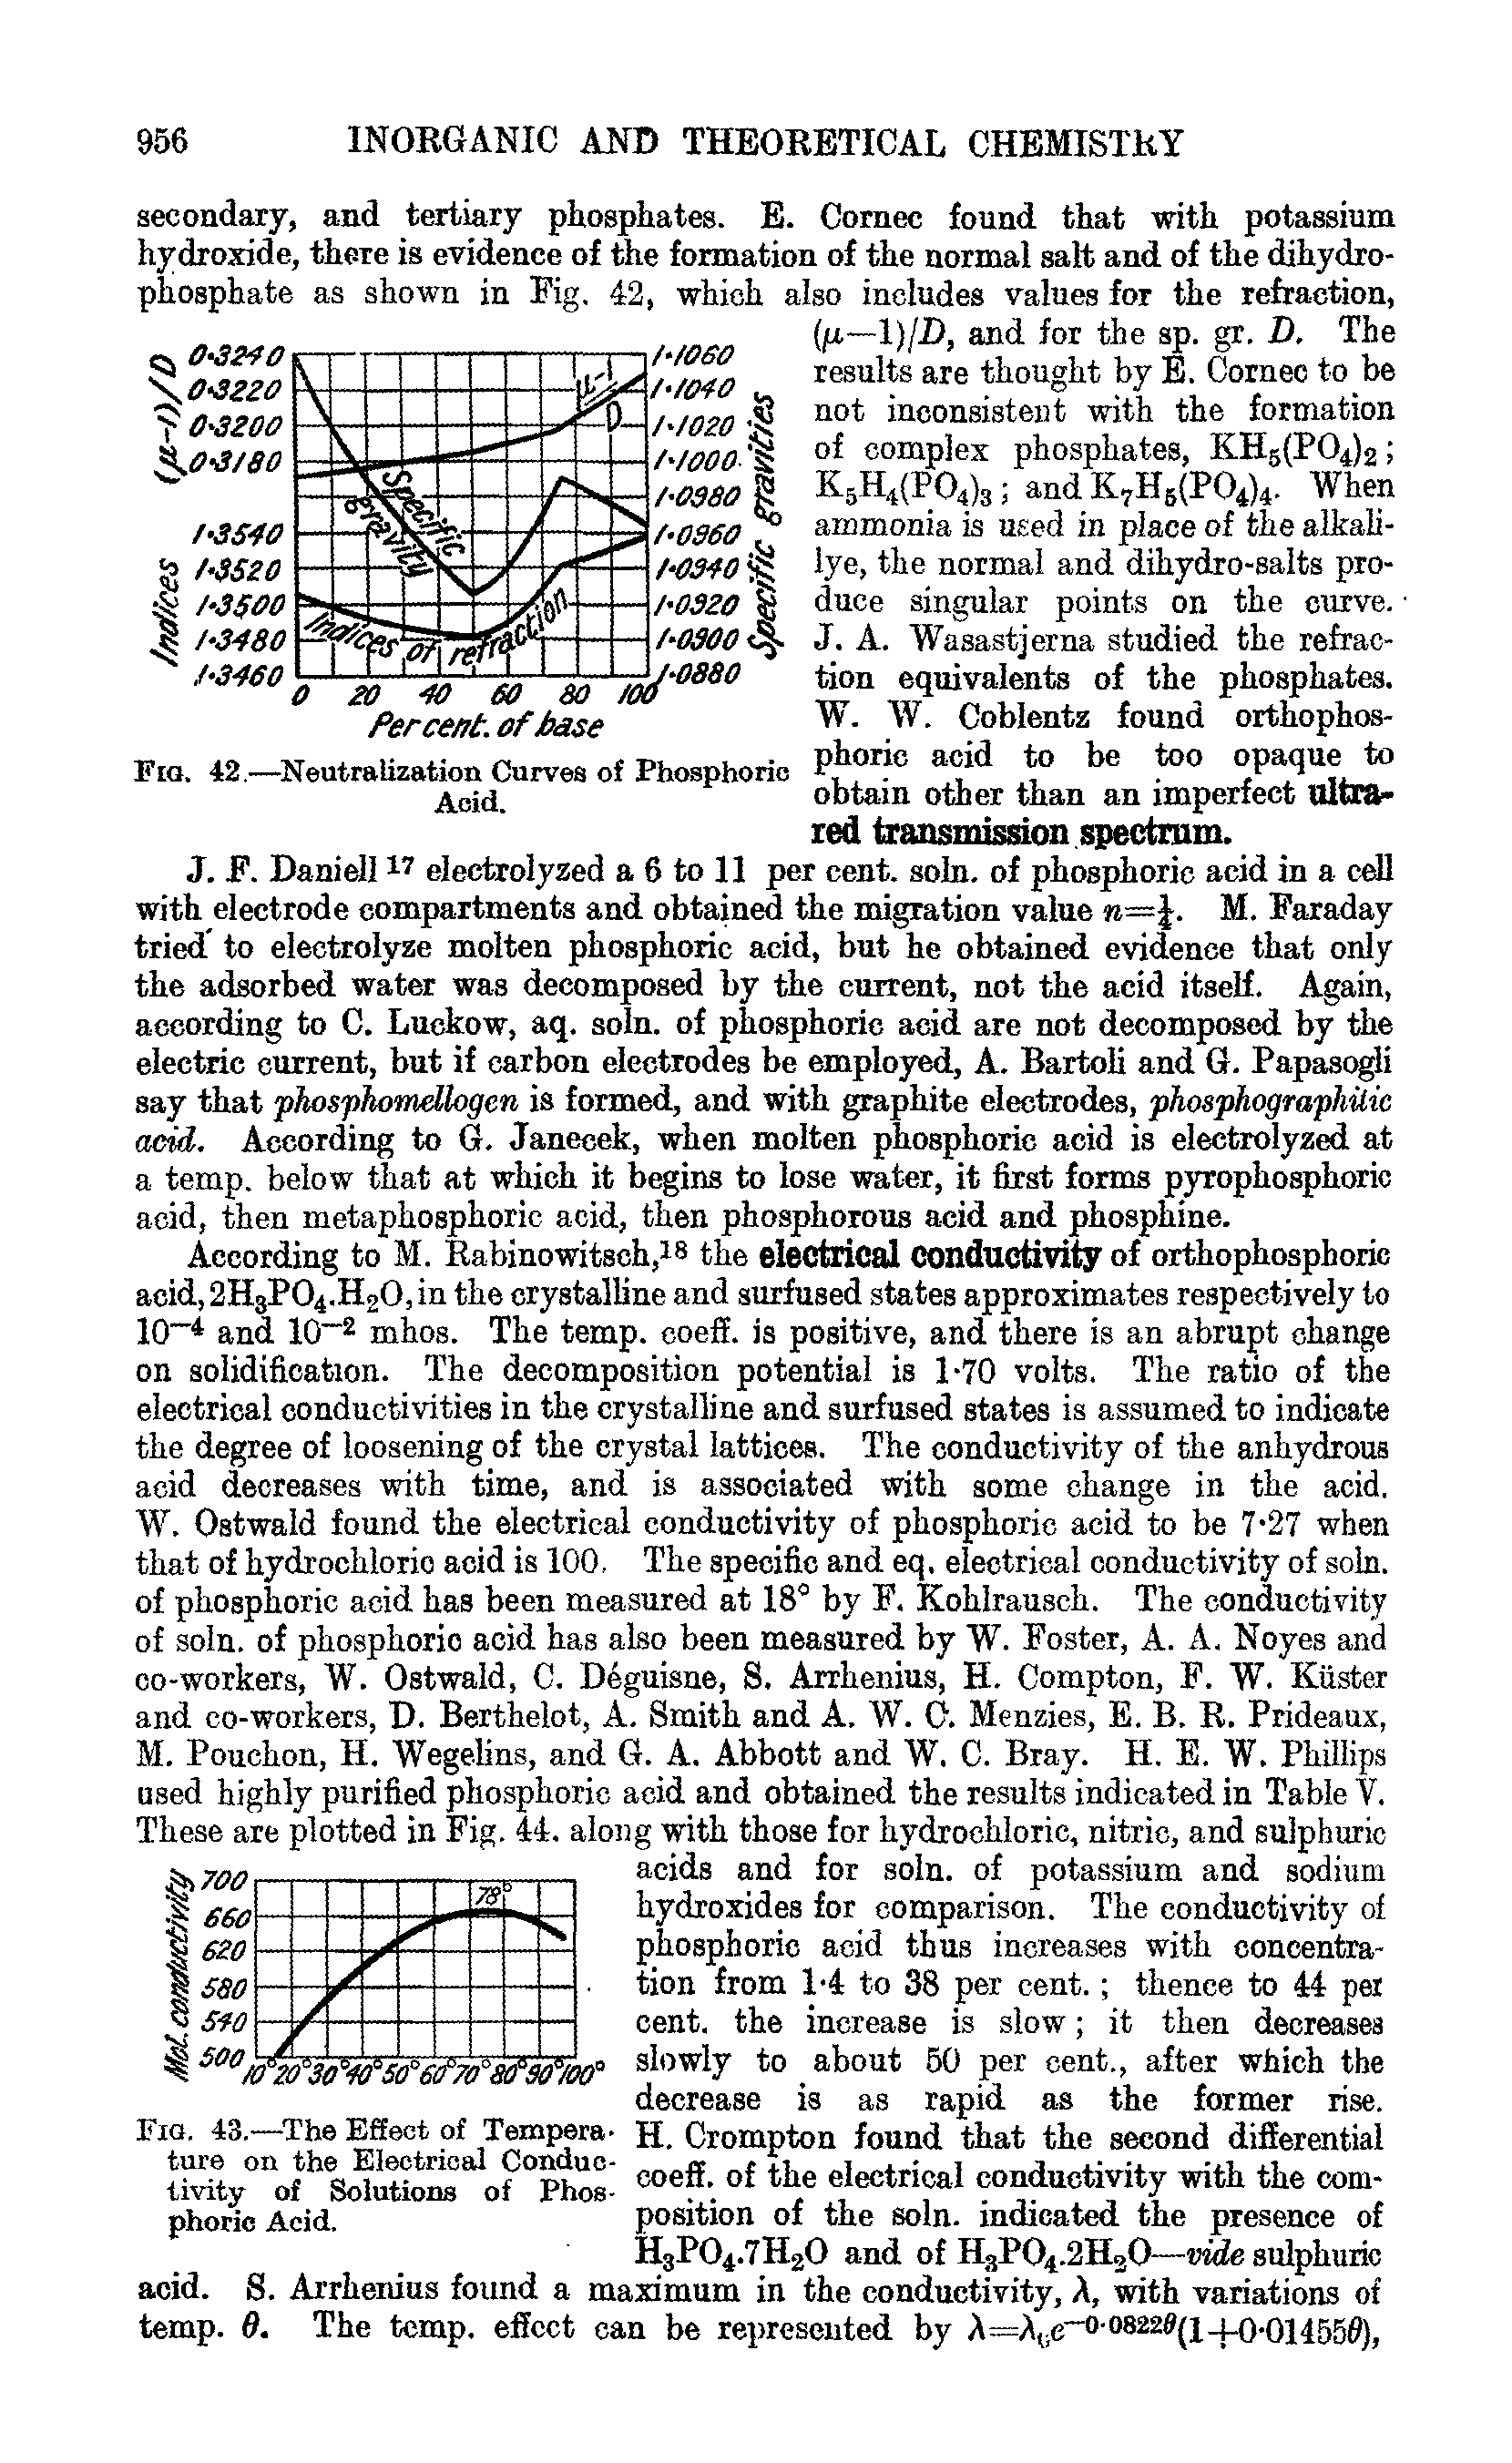 Fig. 43.—The Effect of Temperature on the Electrical Conductivity of Solutions of Phosphoric Acid.